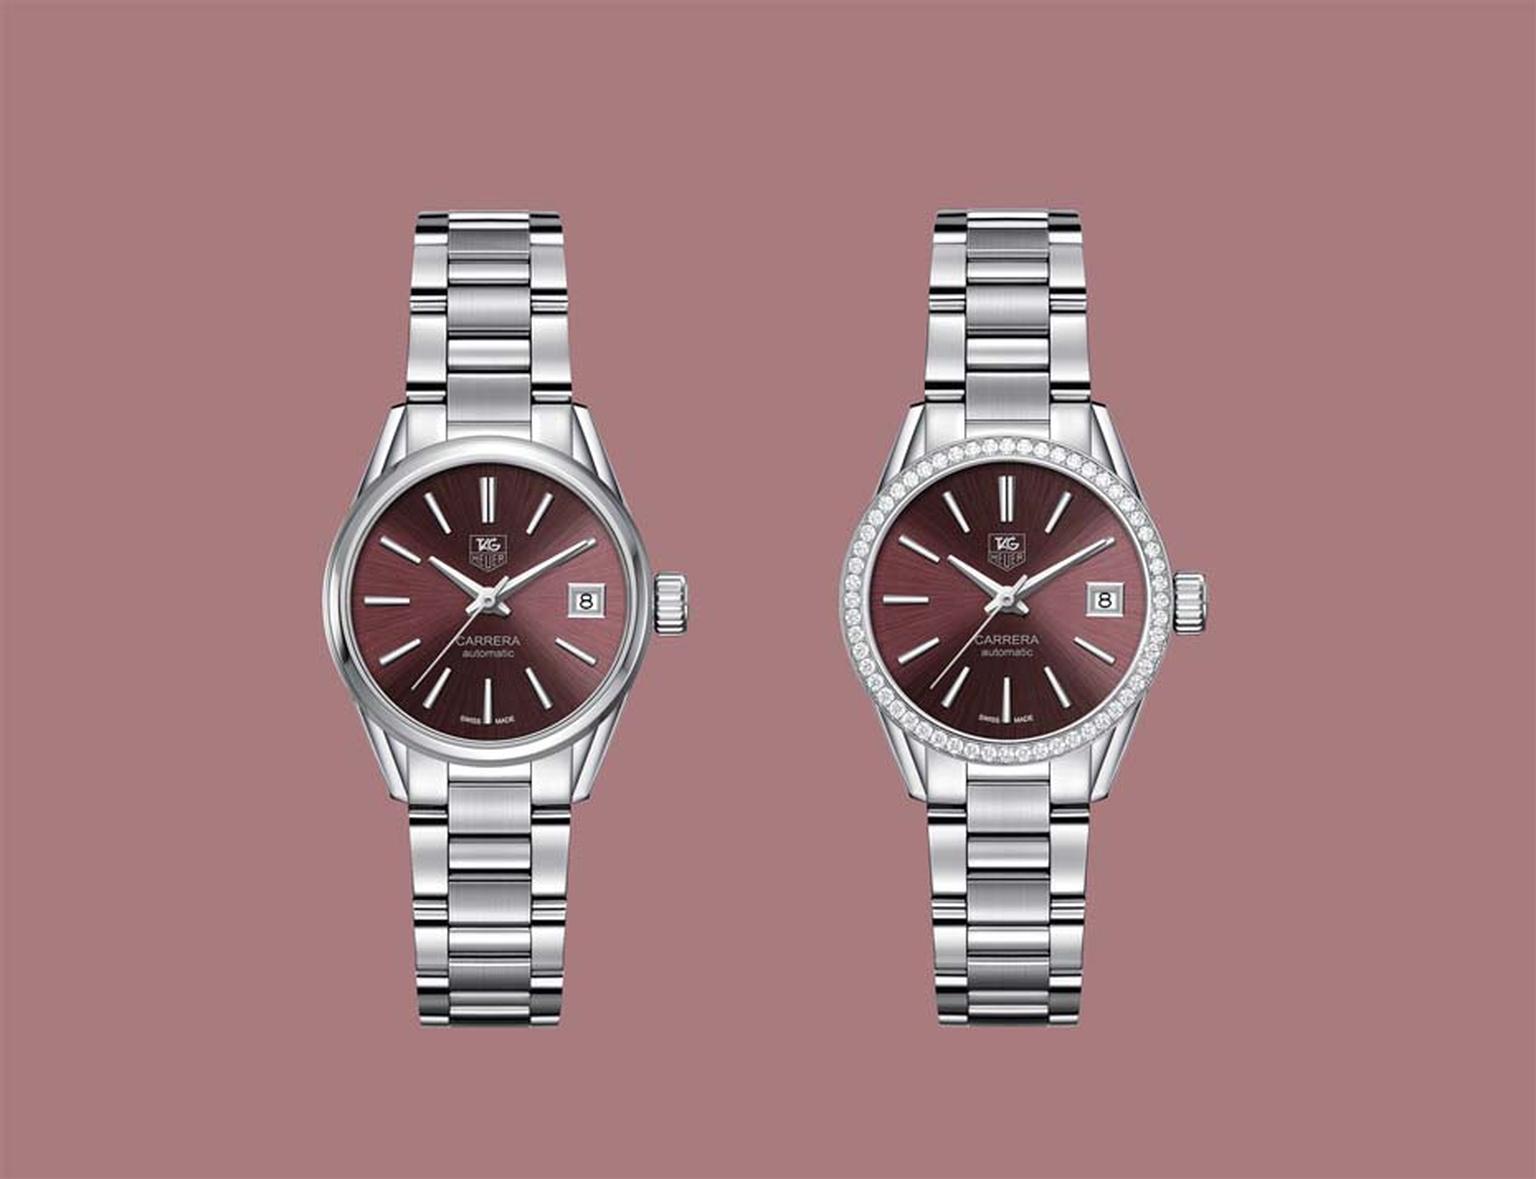 TAG Heuer watches Carrera Lady 28mm is a ladies version of the legendary Carrera watch of 1964. The sleek, fully integrated steel bracelet gives this watch a cool streamlined profile.